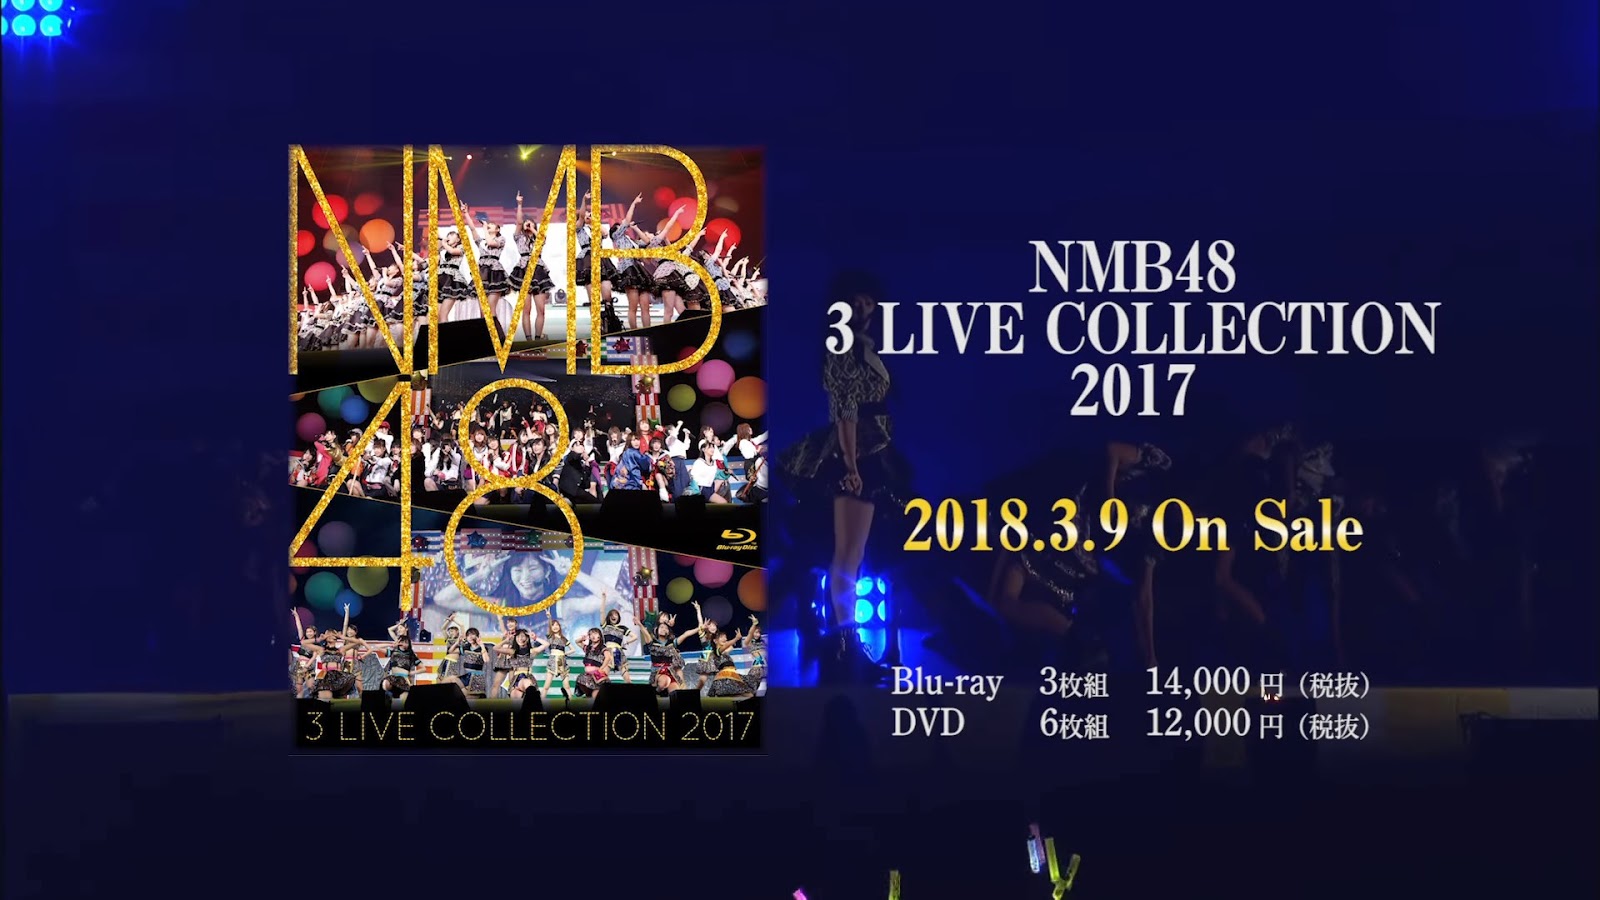 3LIVECOLLECTION　NMB48　2017-